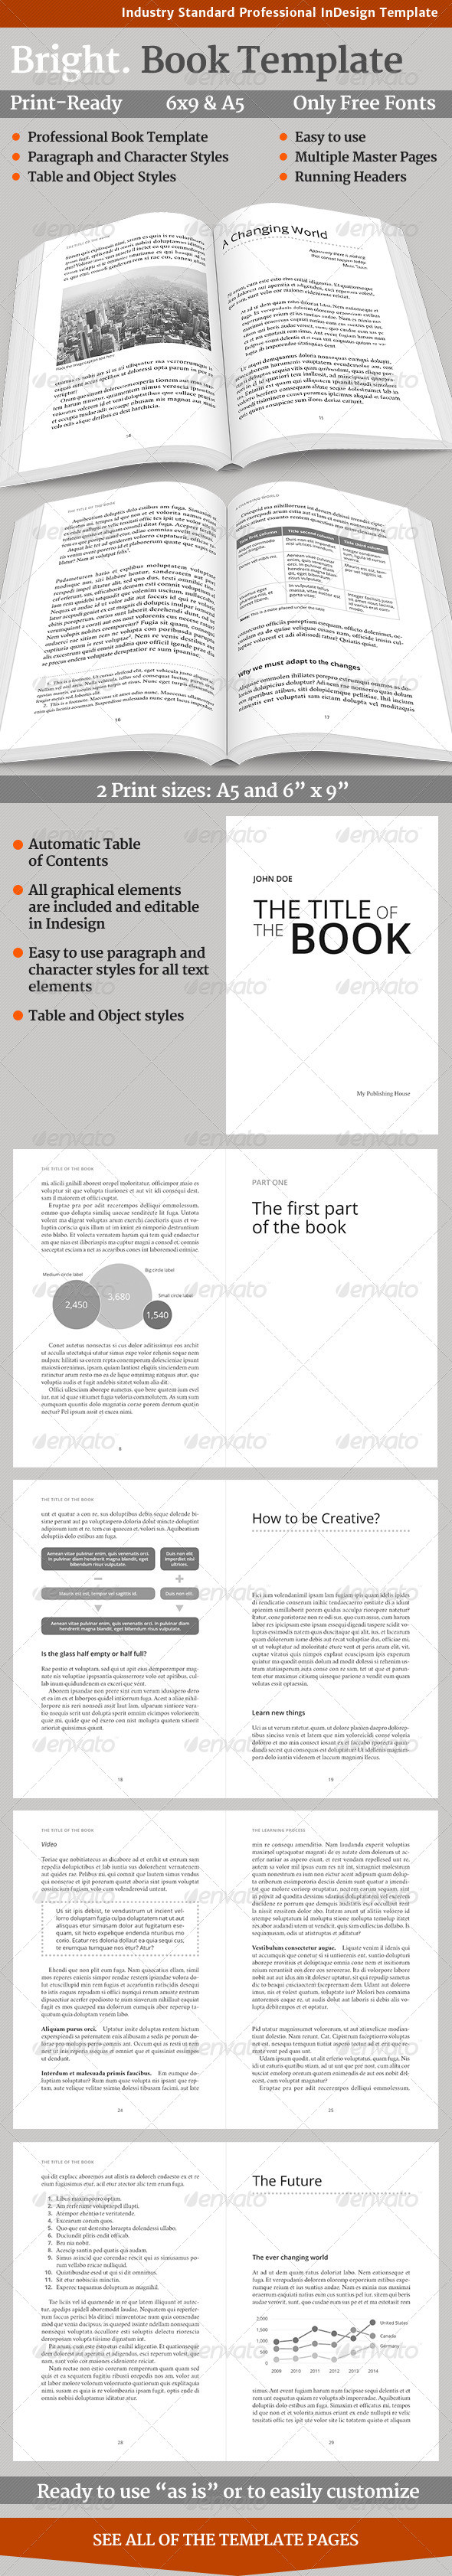 Preview bright book template